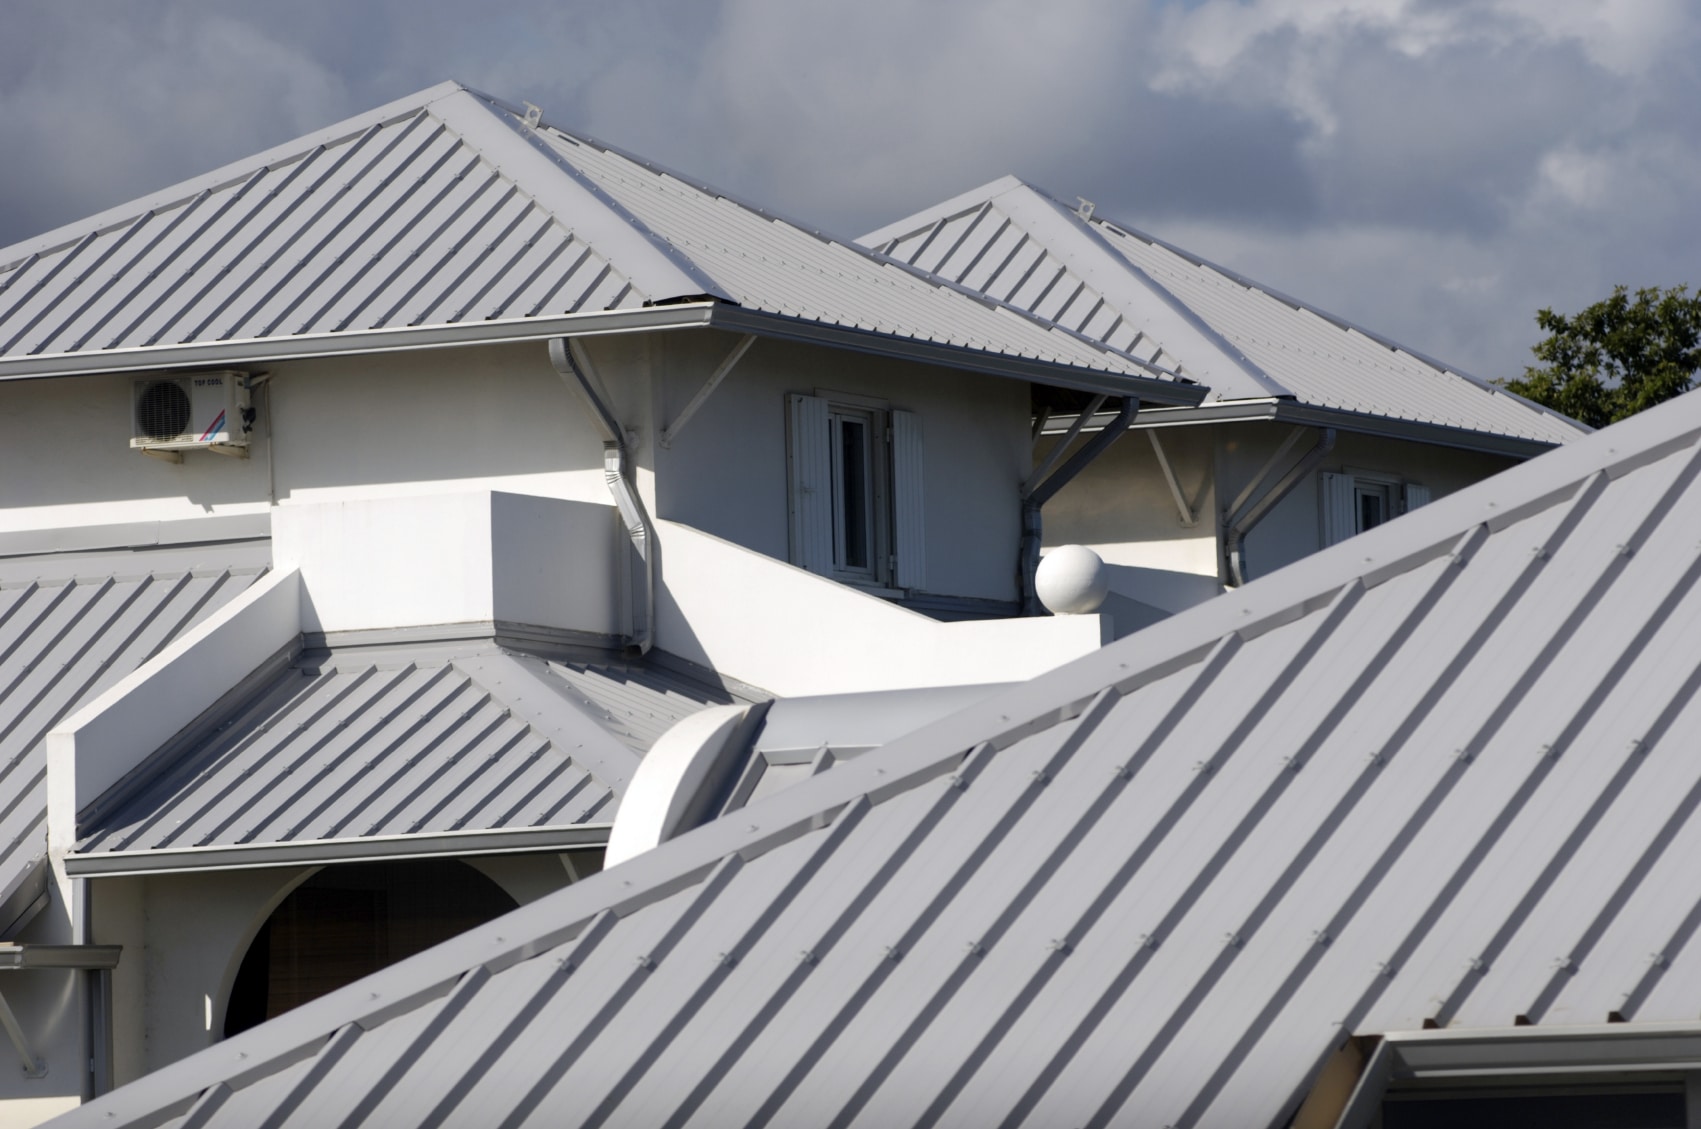 How To Overlap Corrugated Metal Roofing 